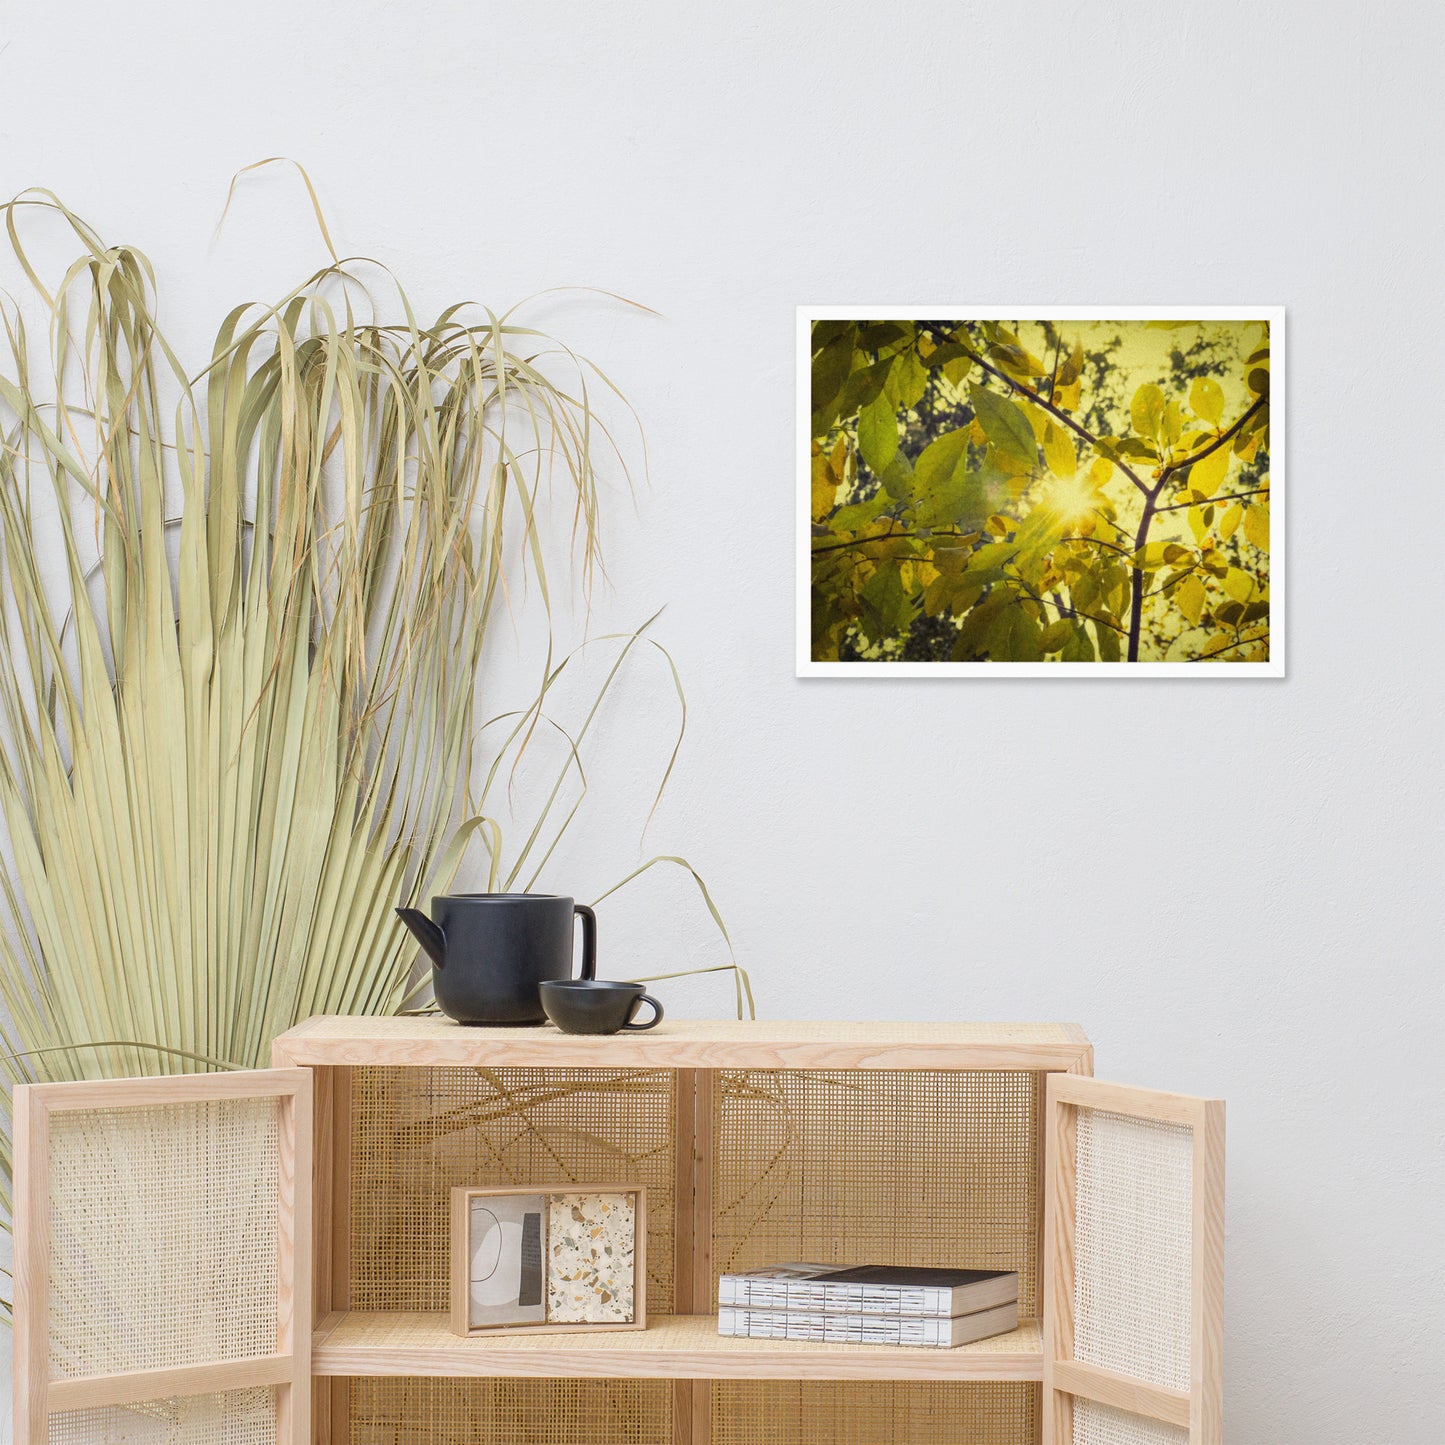 Framed Pictures For Hallway: Aged Golden Leaves Abstract / Country Farmhouse Style / Botanical / Nature Photo Framed Wall Art Print - Artwork - Home Decor